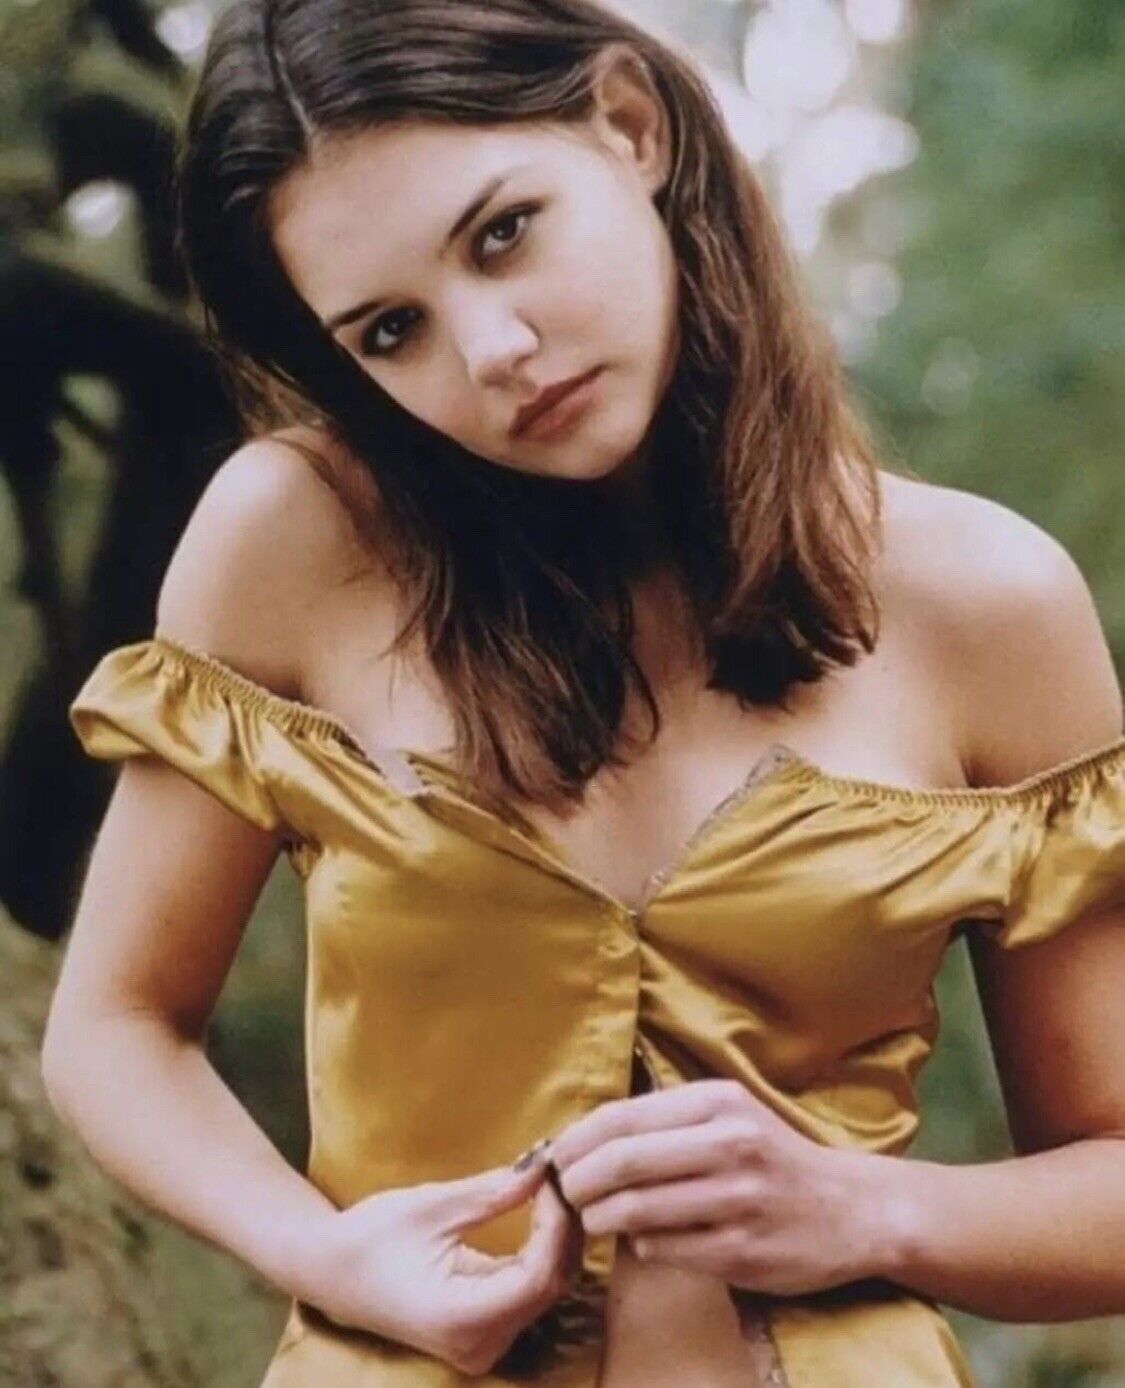 KATIE HOLMES - SWEET, INNOCENT AND SEXY SHOT 